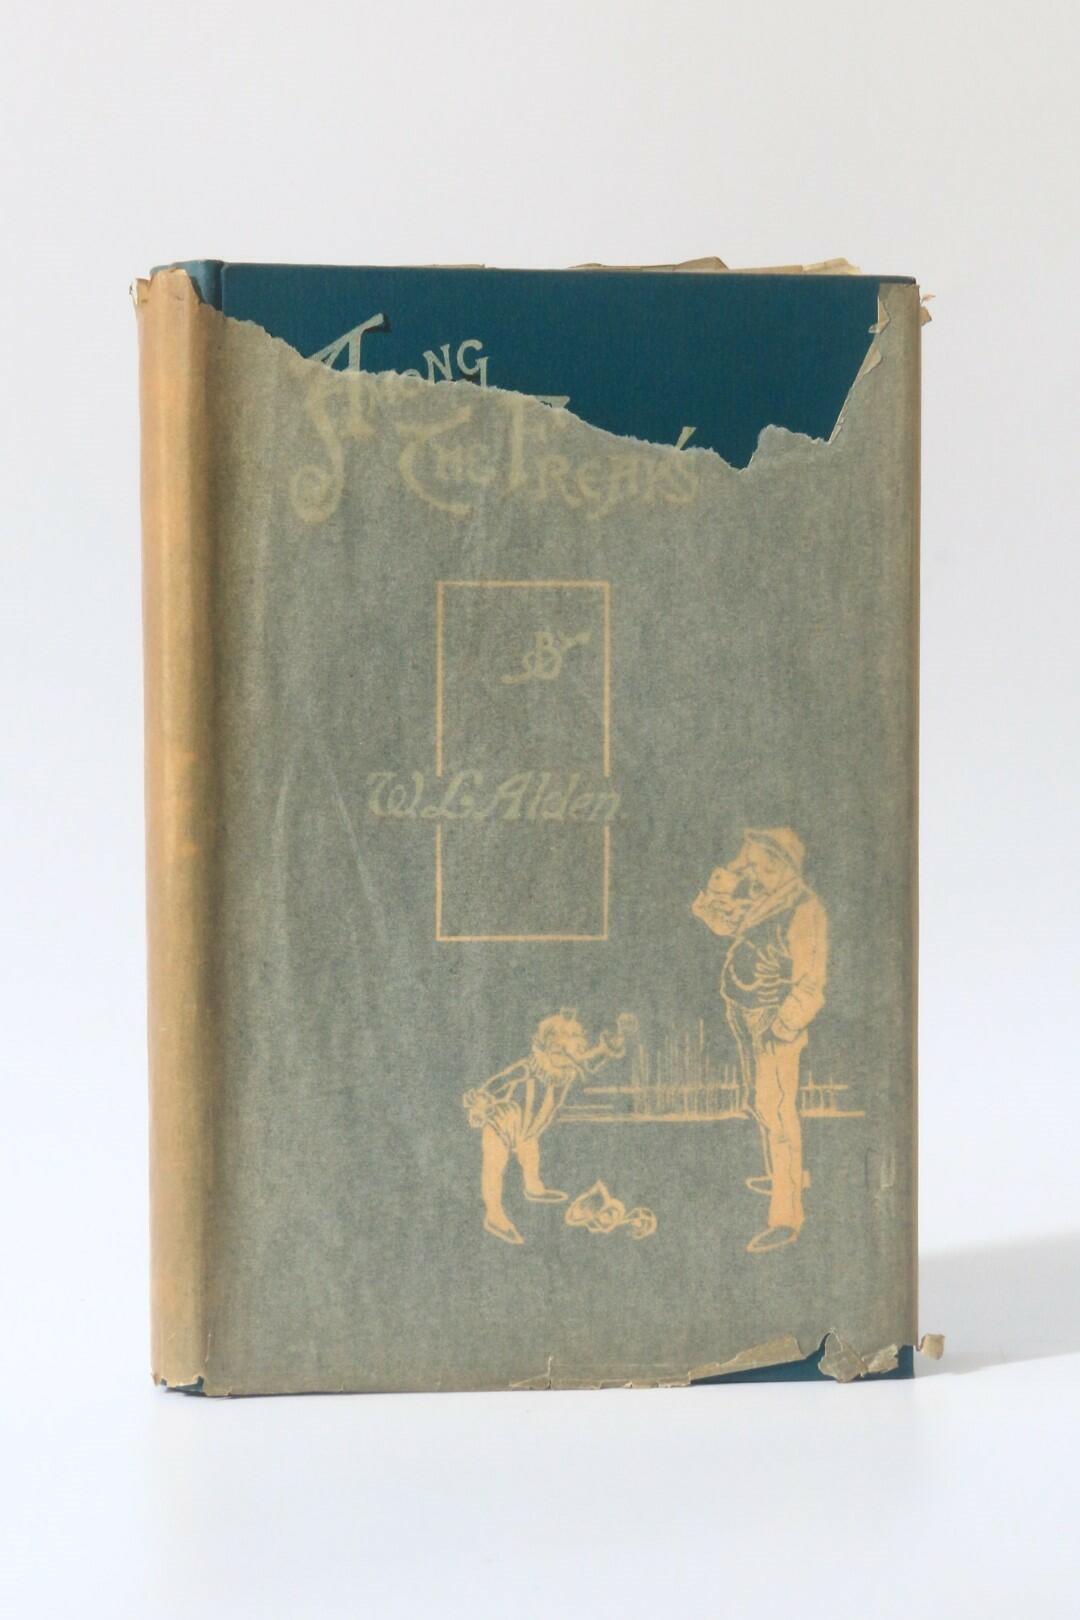 W.L. Alden - Among the Freaks - Green & Co., 1896, First Edition.